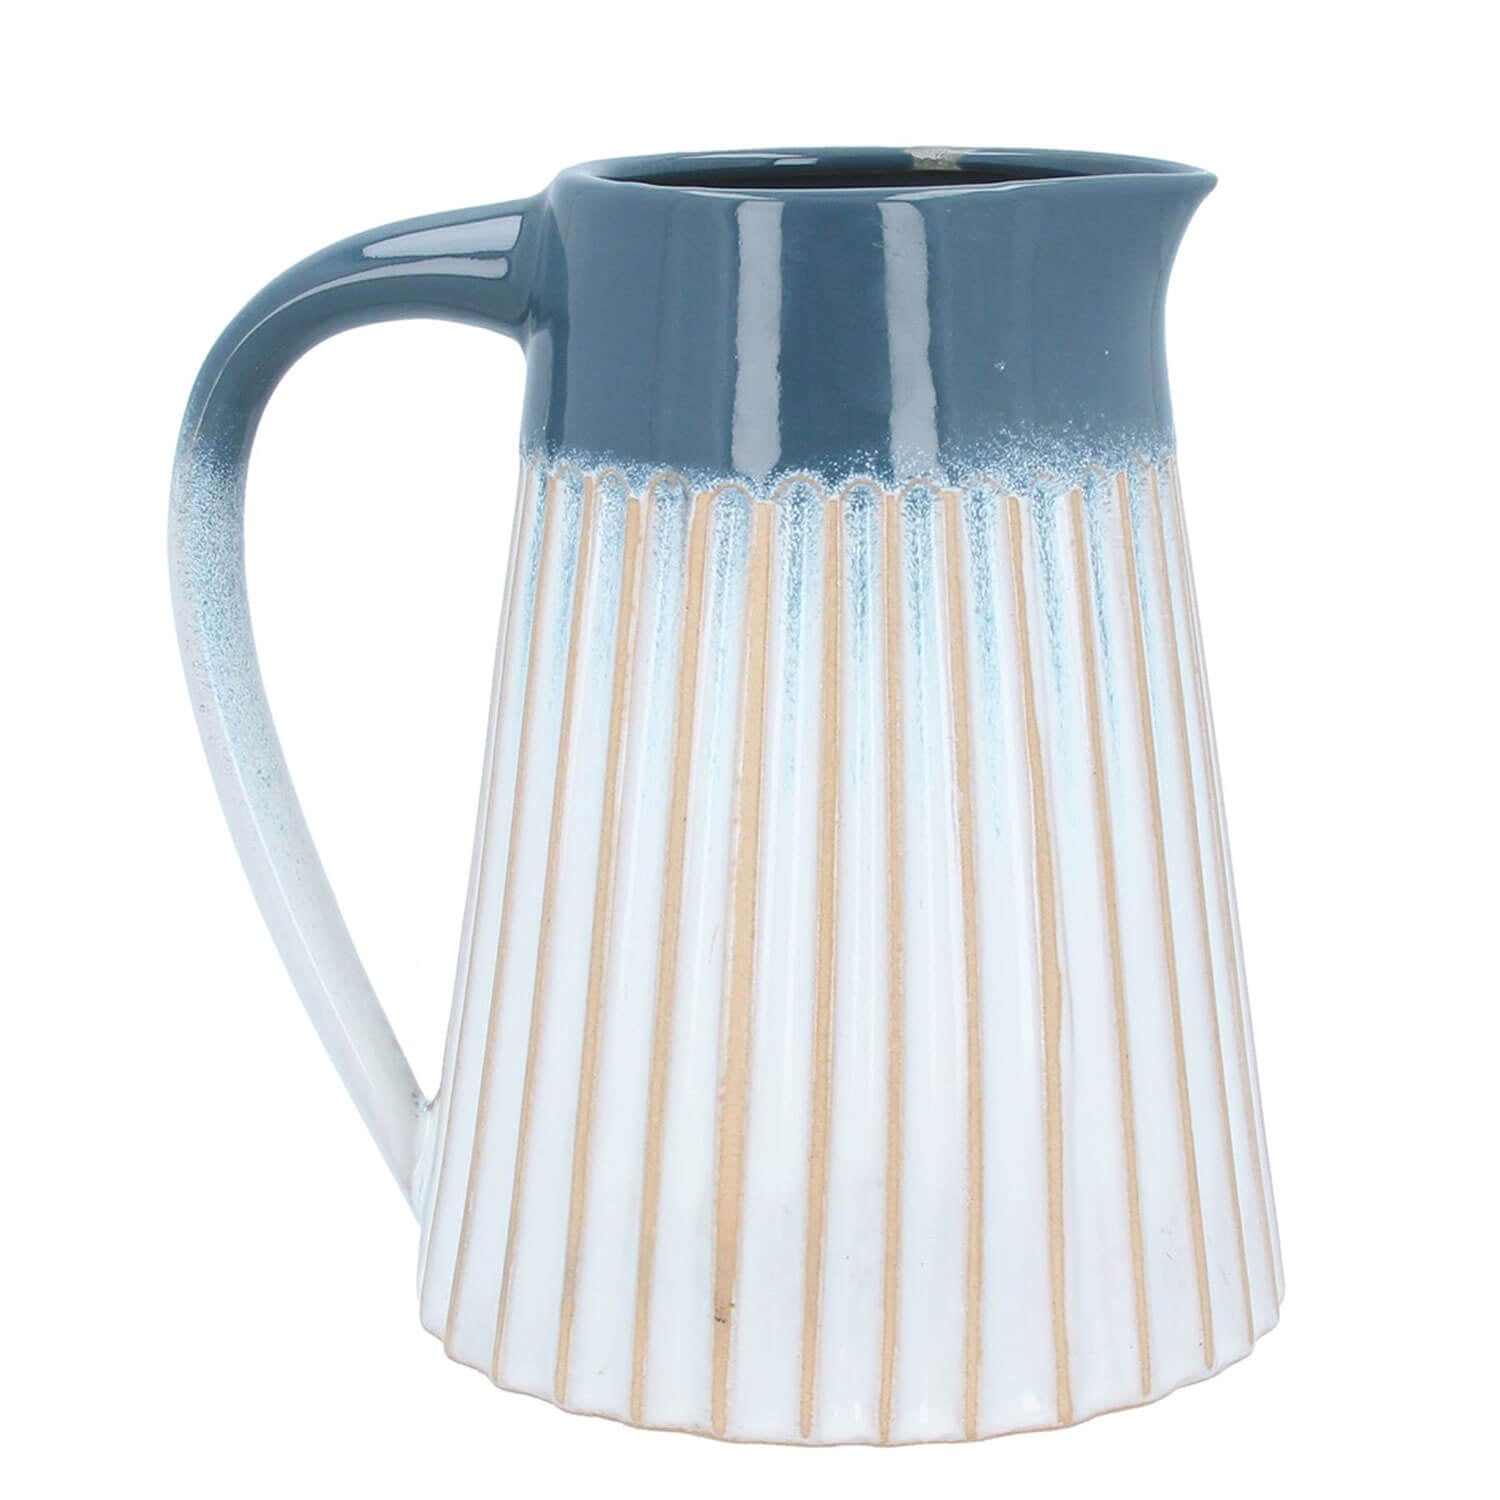 Gisella Graham Blue Ombre Ceramic Ribbed Jug - Small 1 Shaws Department Stores